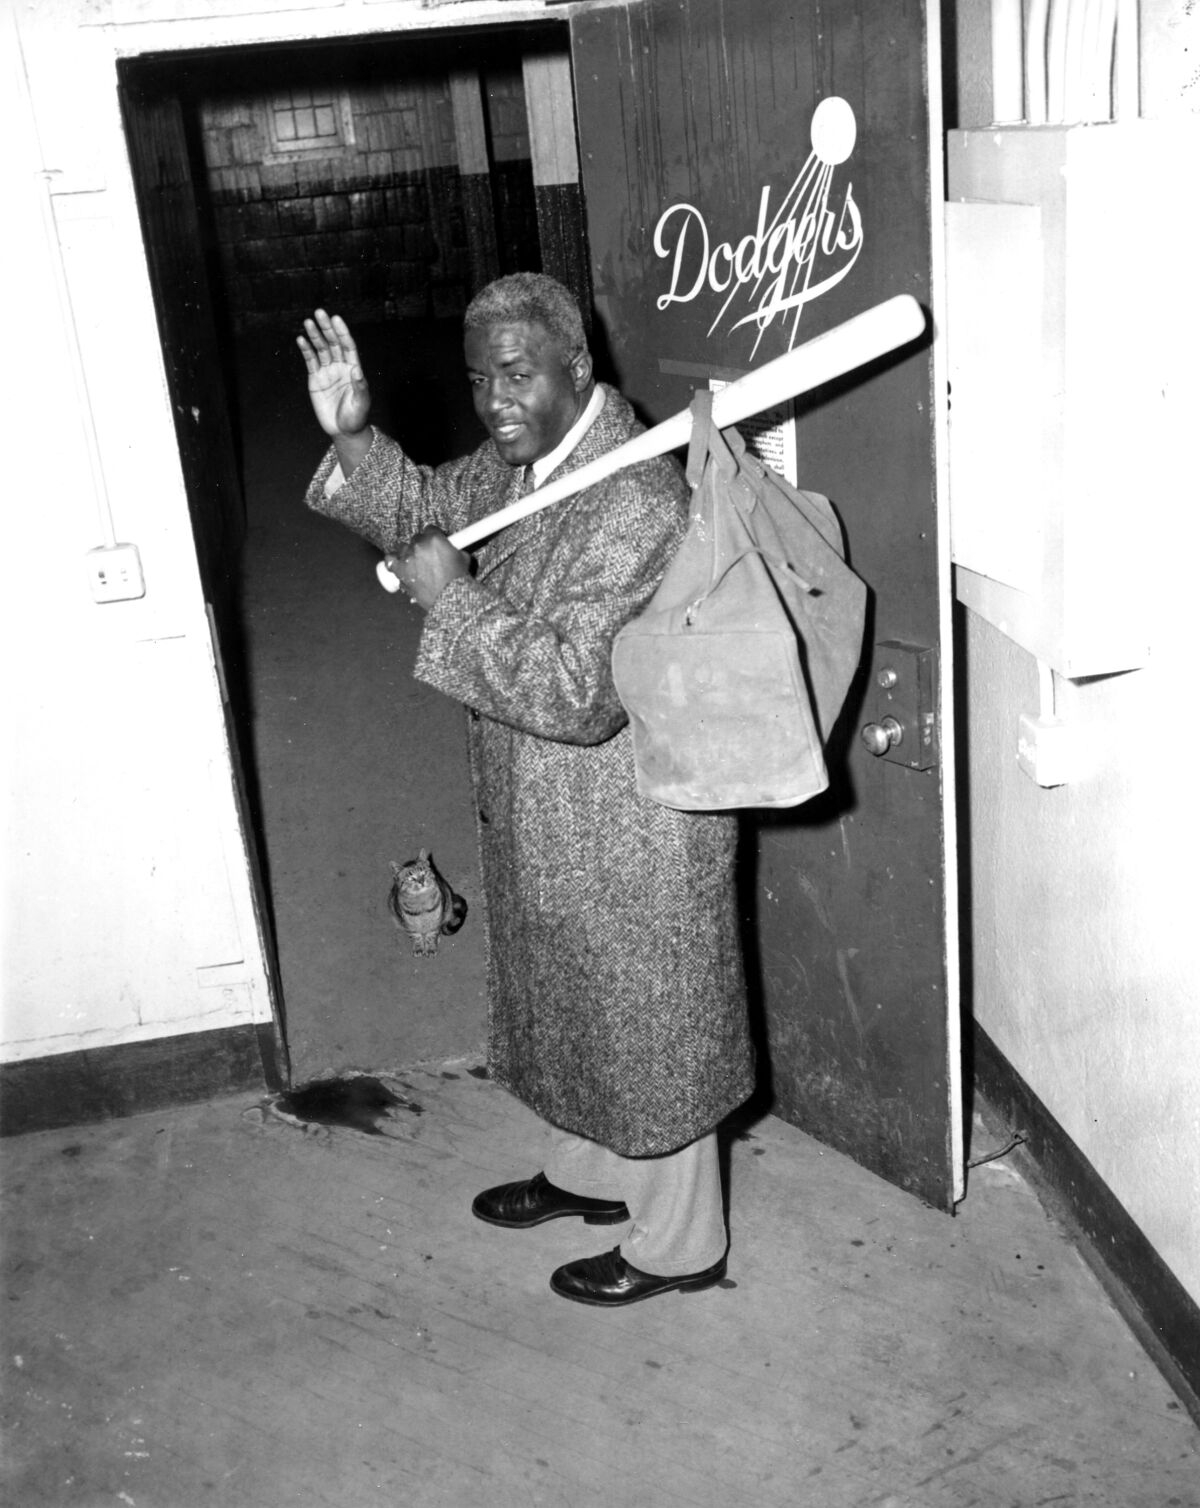 Jackie Robinson waves as he leaves the clubhouse after collecting his belongings at Ebbets Field.